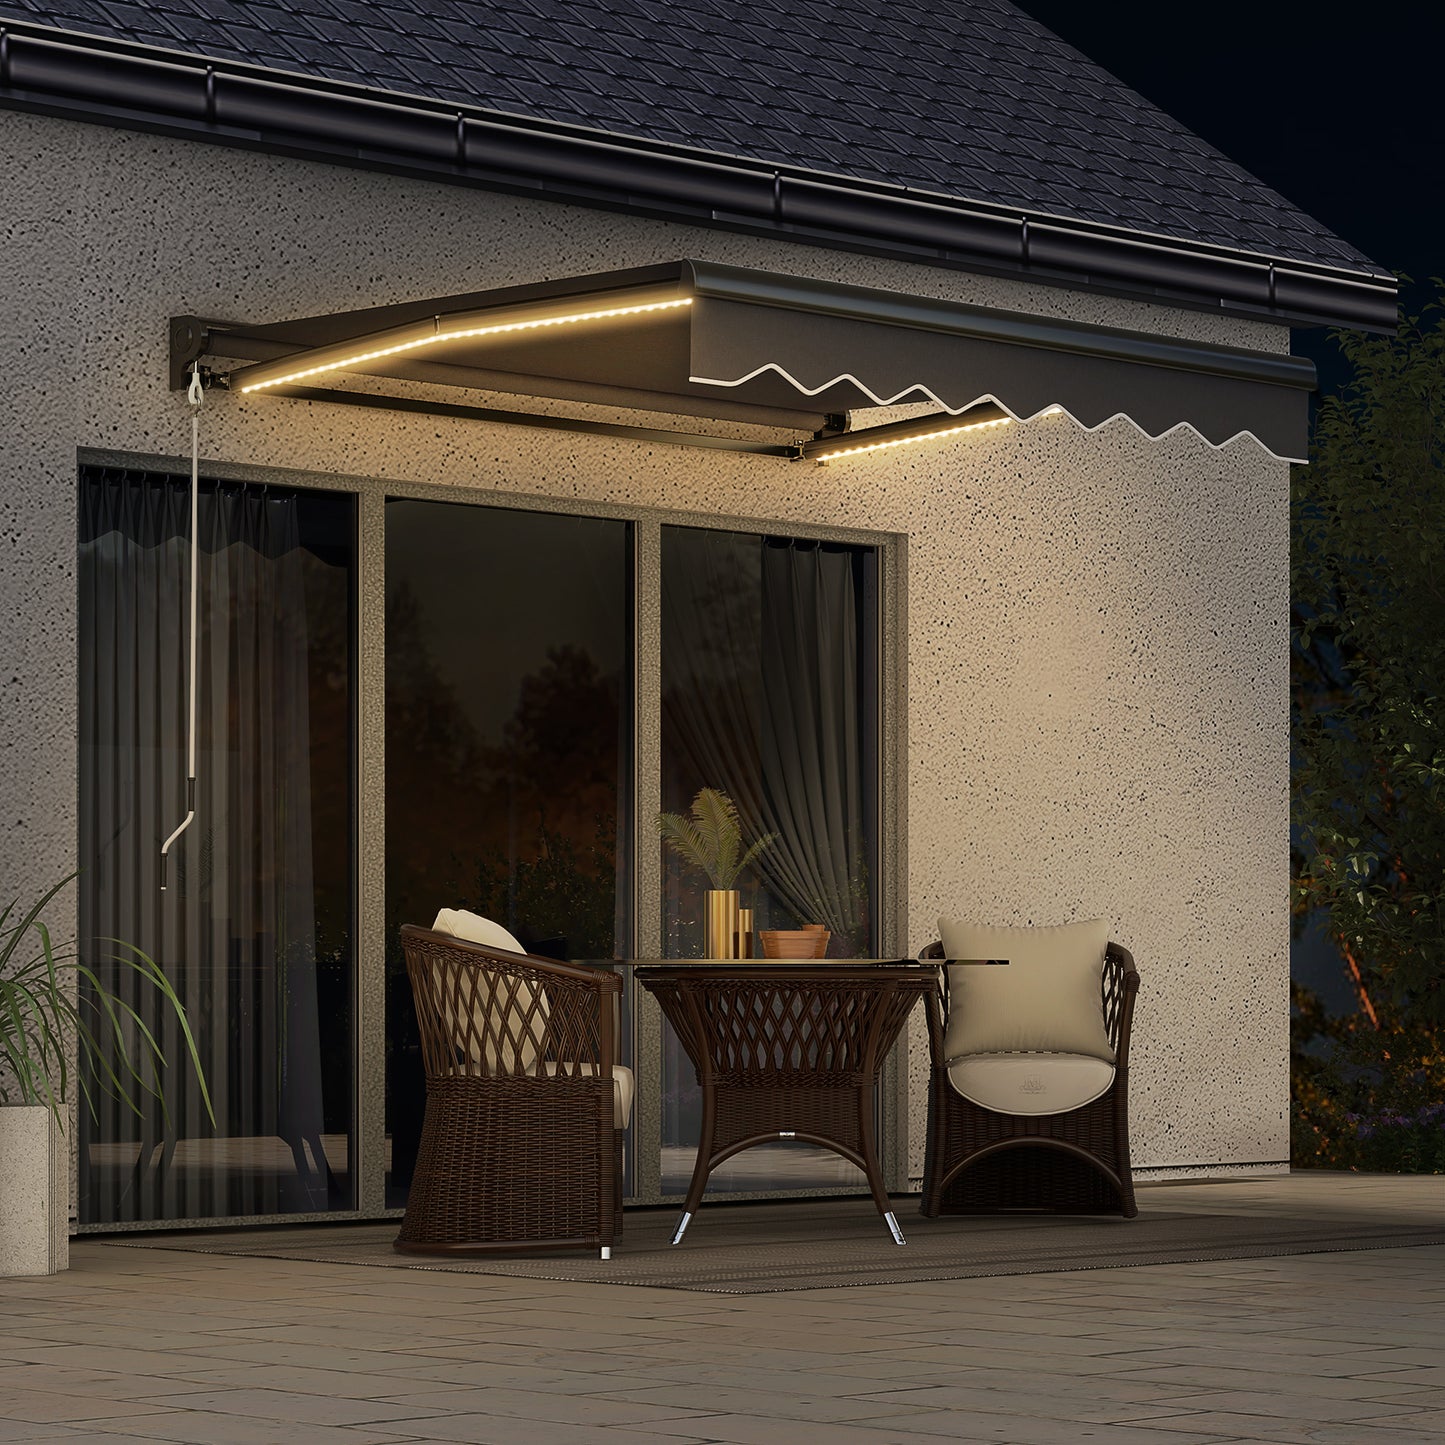 Outsunny 3 x 2.5m Electric Awning with LED Light, Aluminium Frame Retractable Awning Sun Canopies for Patio Door Window